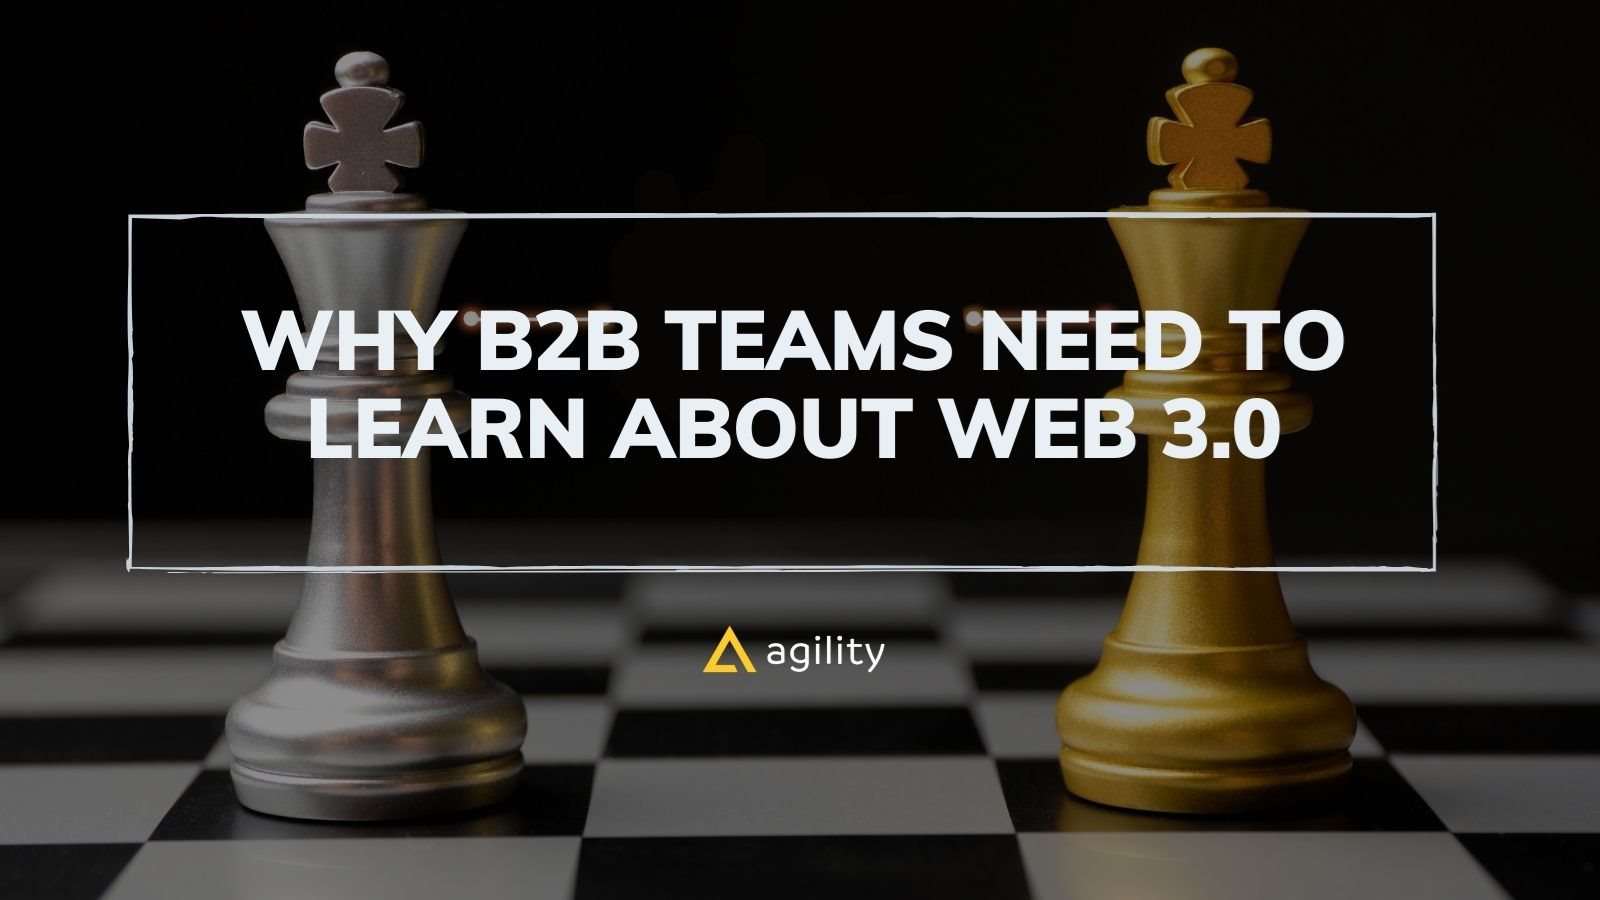 Why B2B teams need to learn about Web 3.0